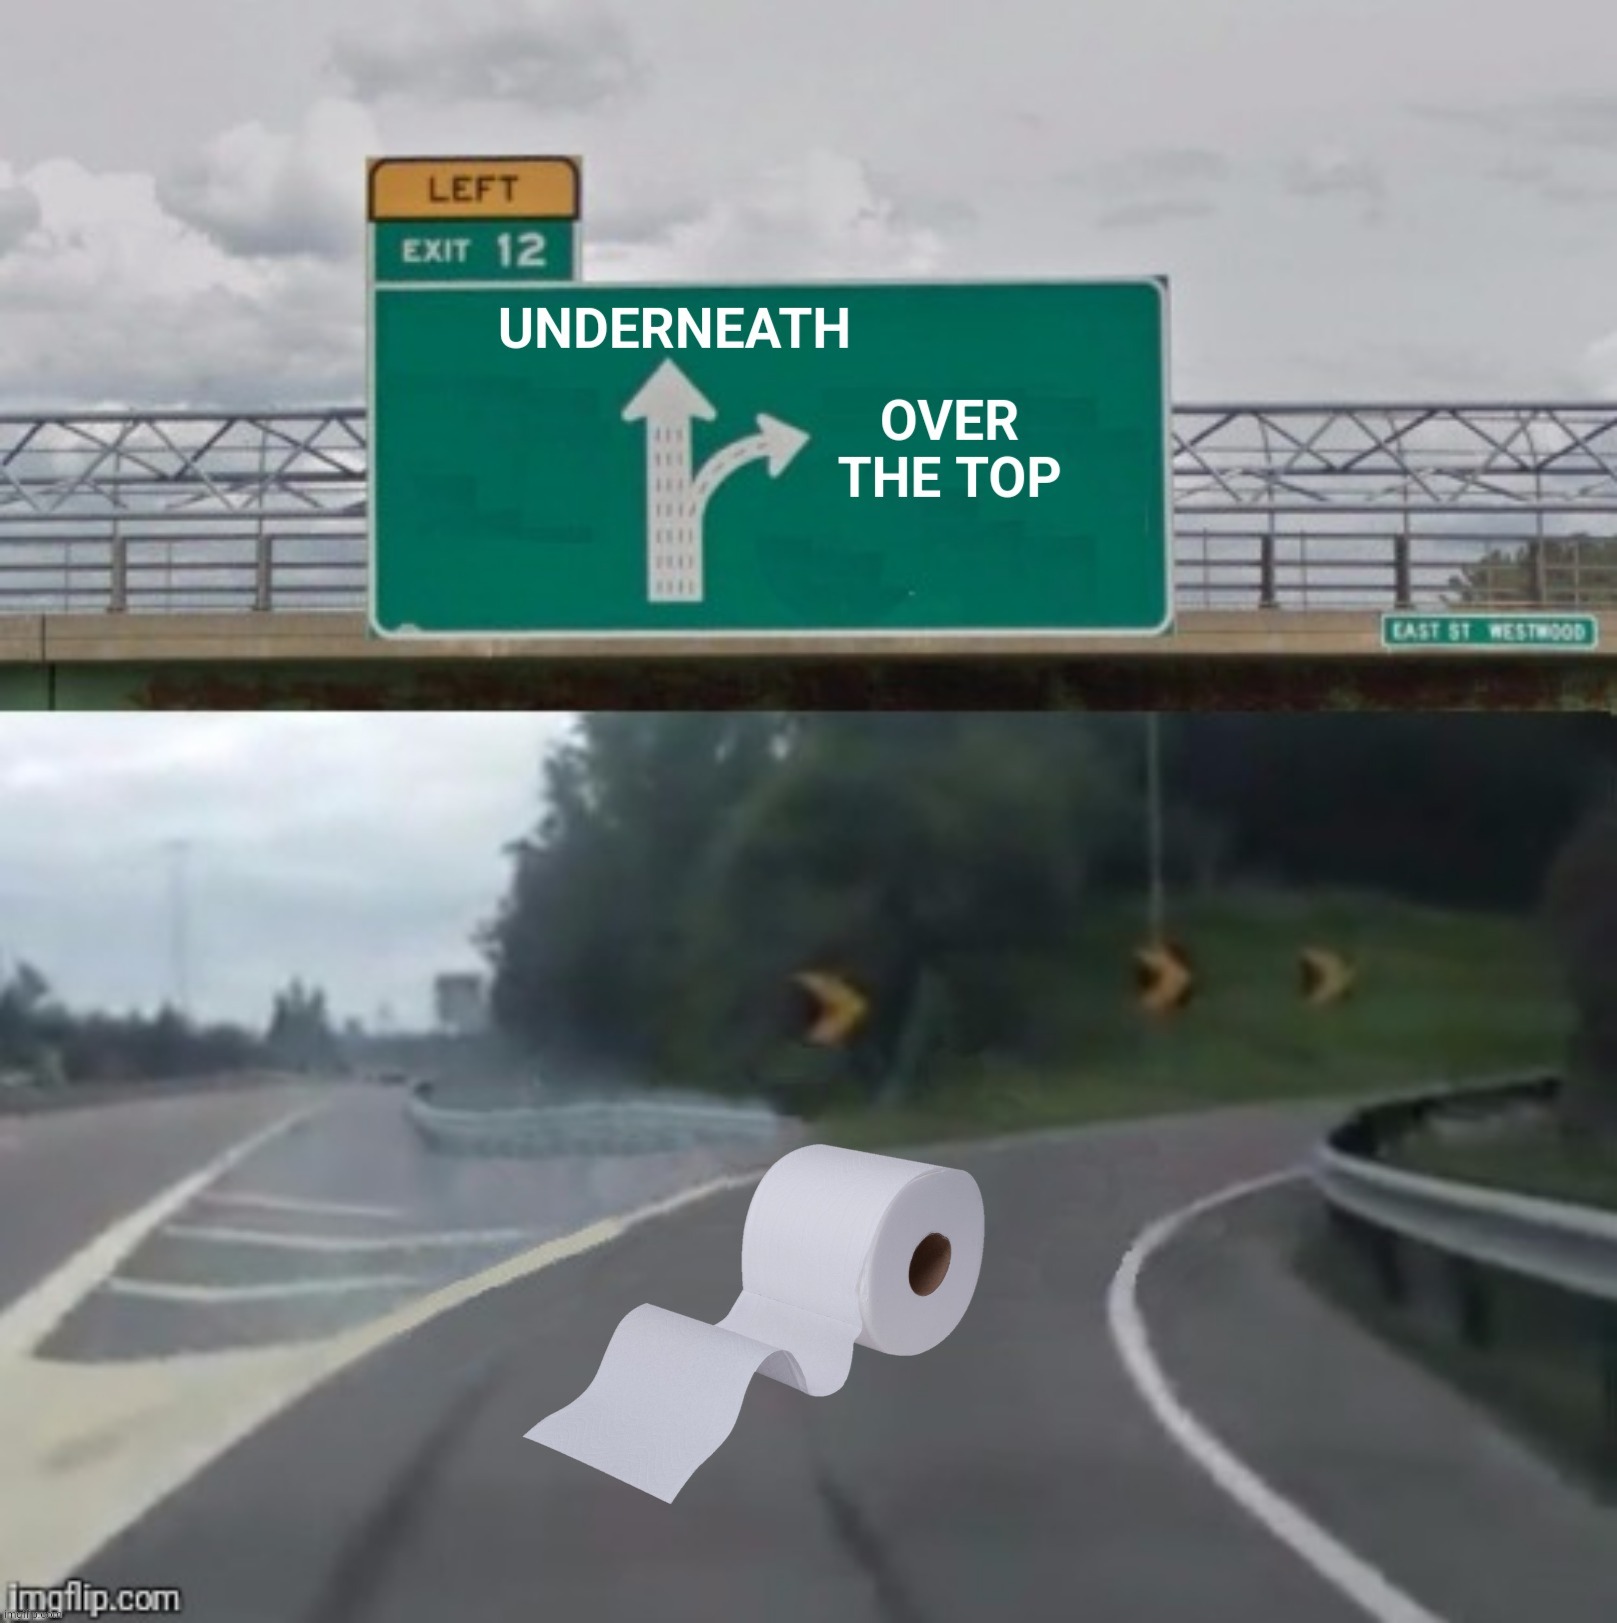 Bad Photoshop Sunday presents:  "This is it folks, over the top!" | image tagged in bad photoshop sunday,left exit 12 off ramp,toilet paper,over the top,underneath | made w/ Imgflip meme maker